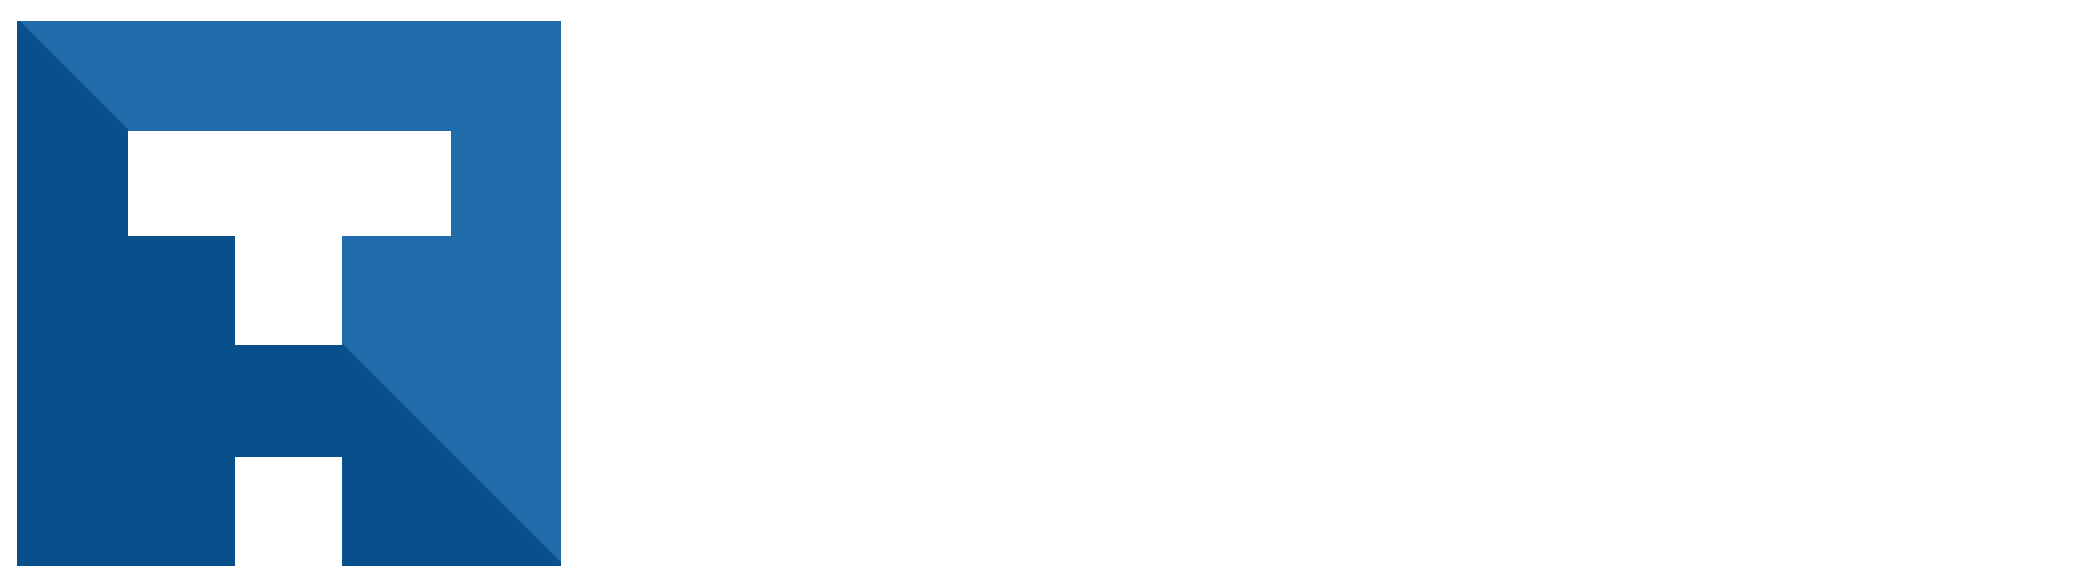 THEN CAPITAL – Hotel Investment